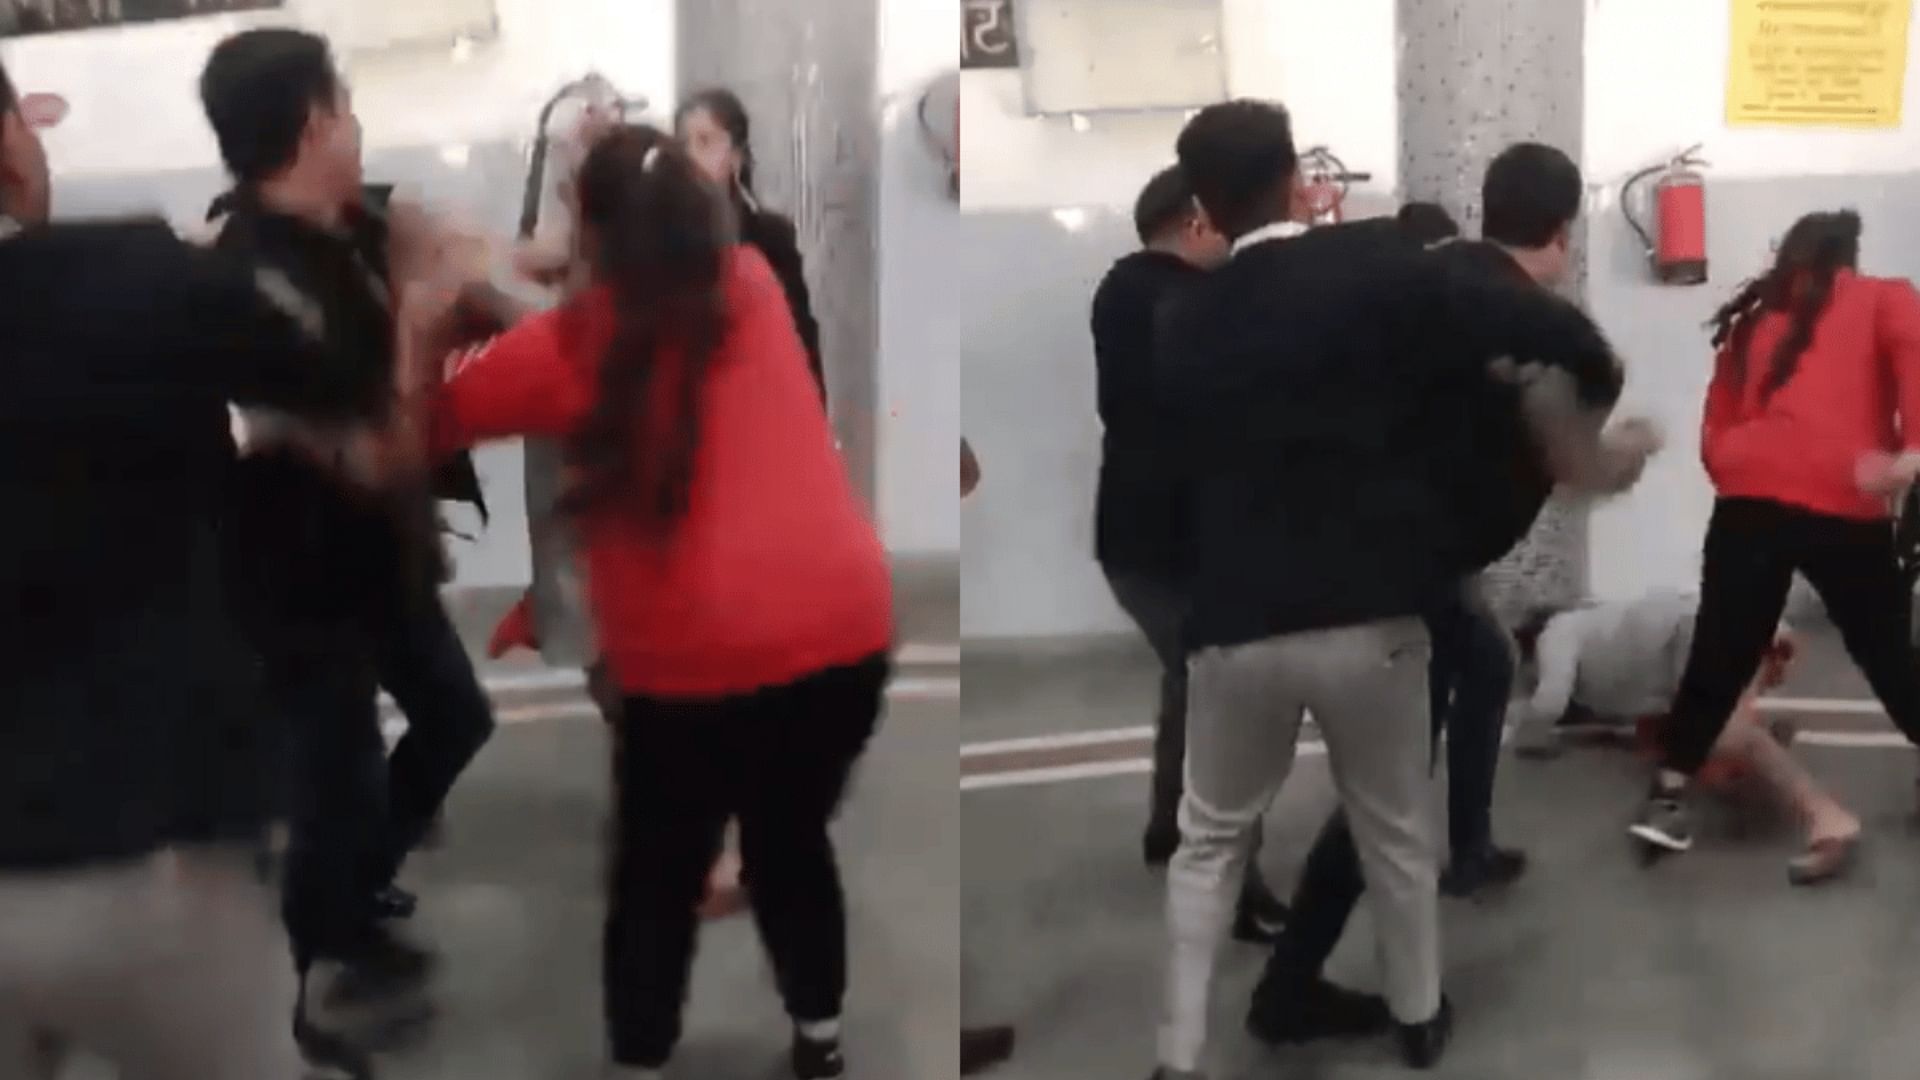 Fight Between Man And Women in Family Court Video Goes Viral on Internet